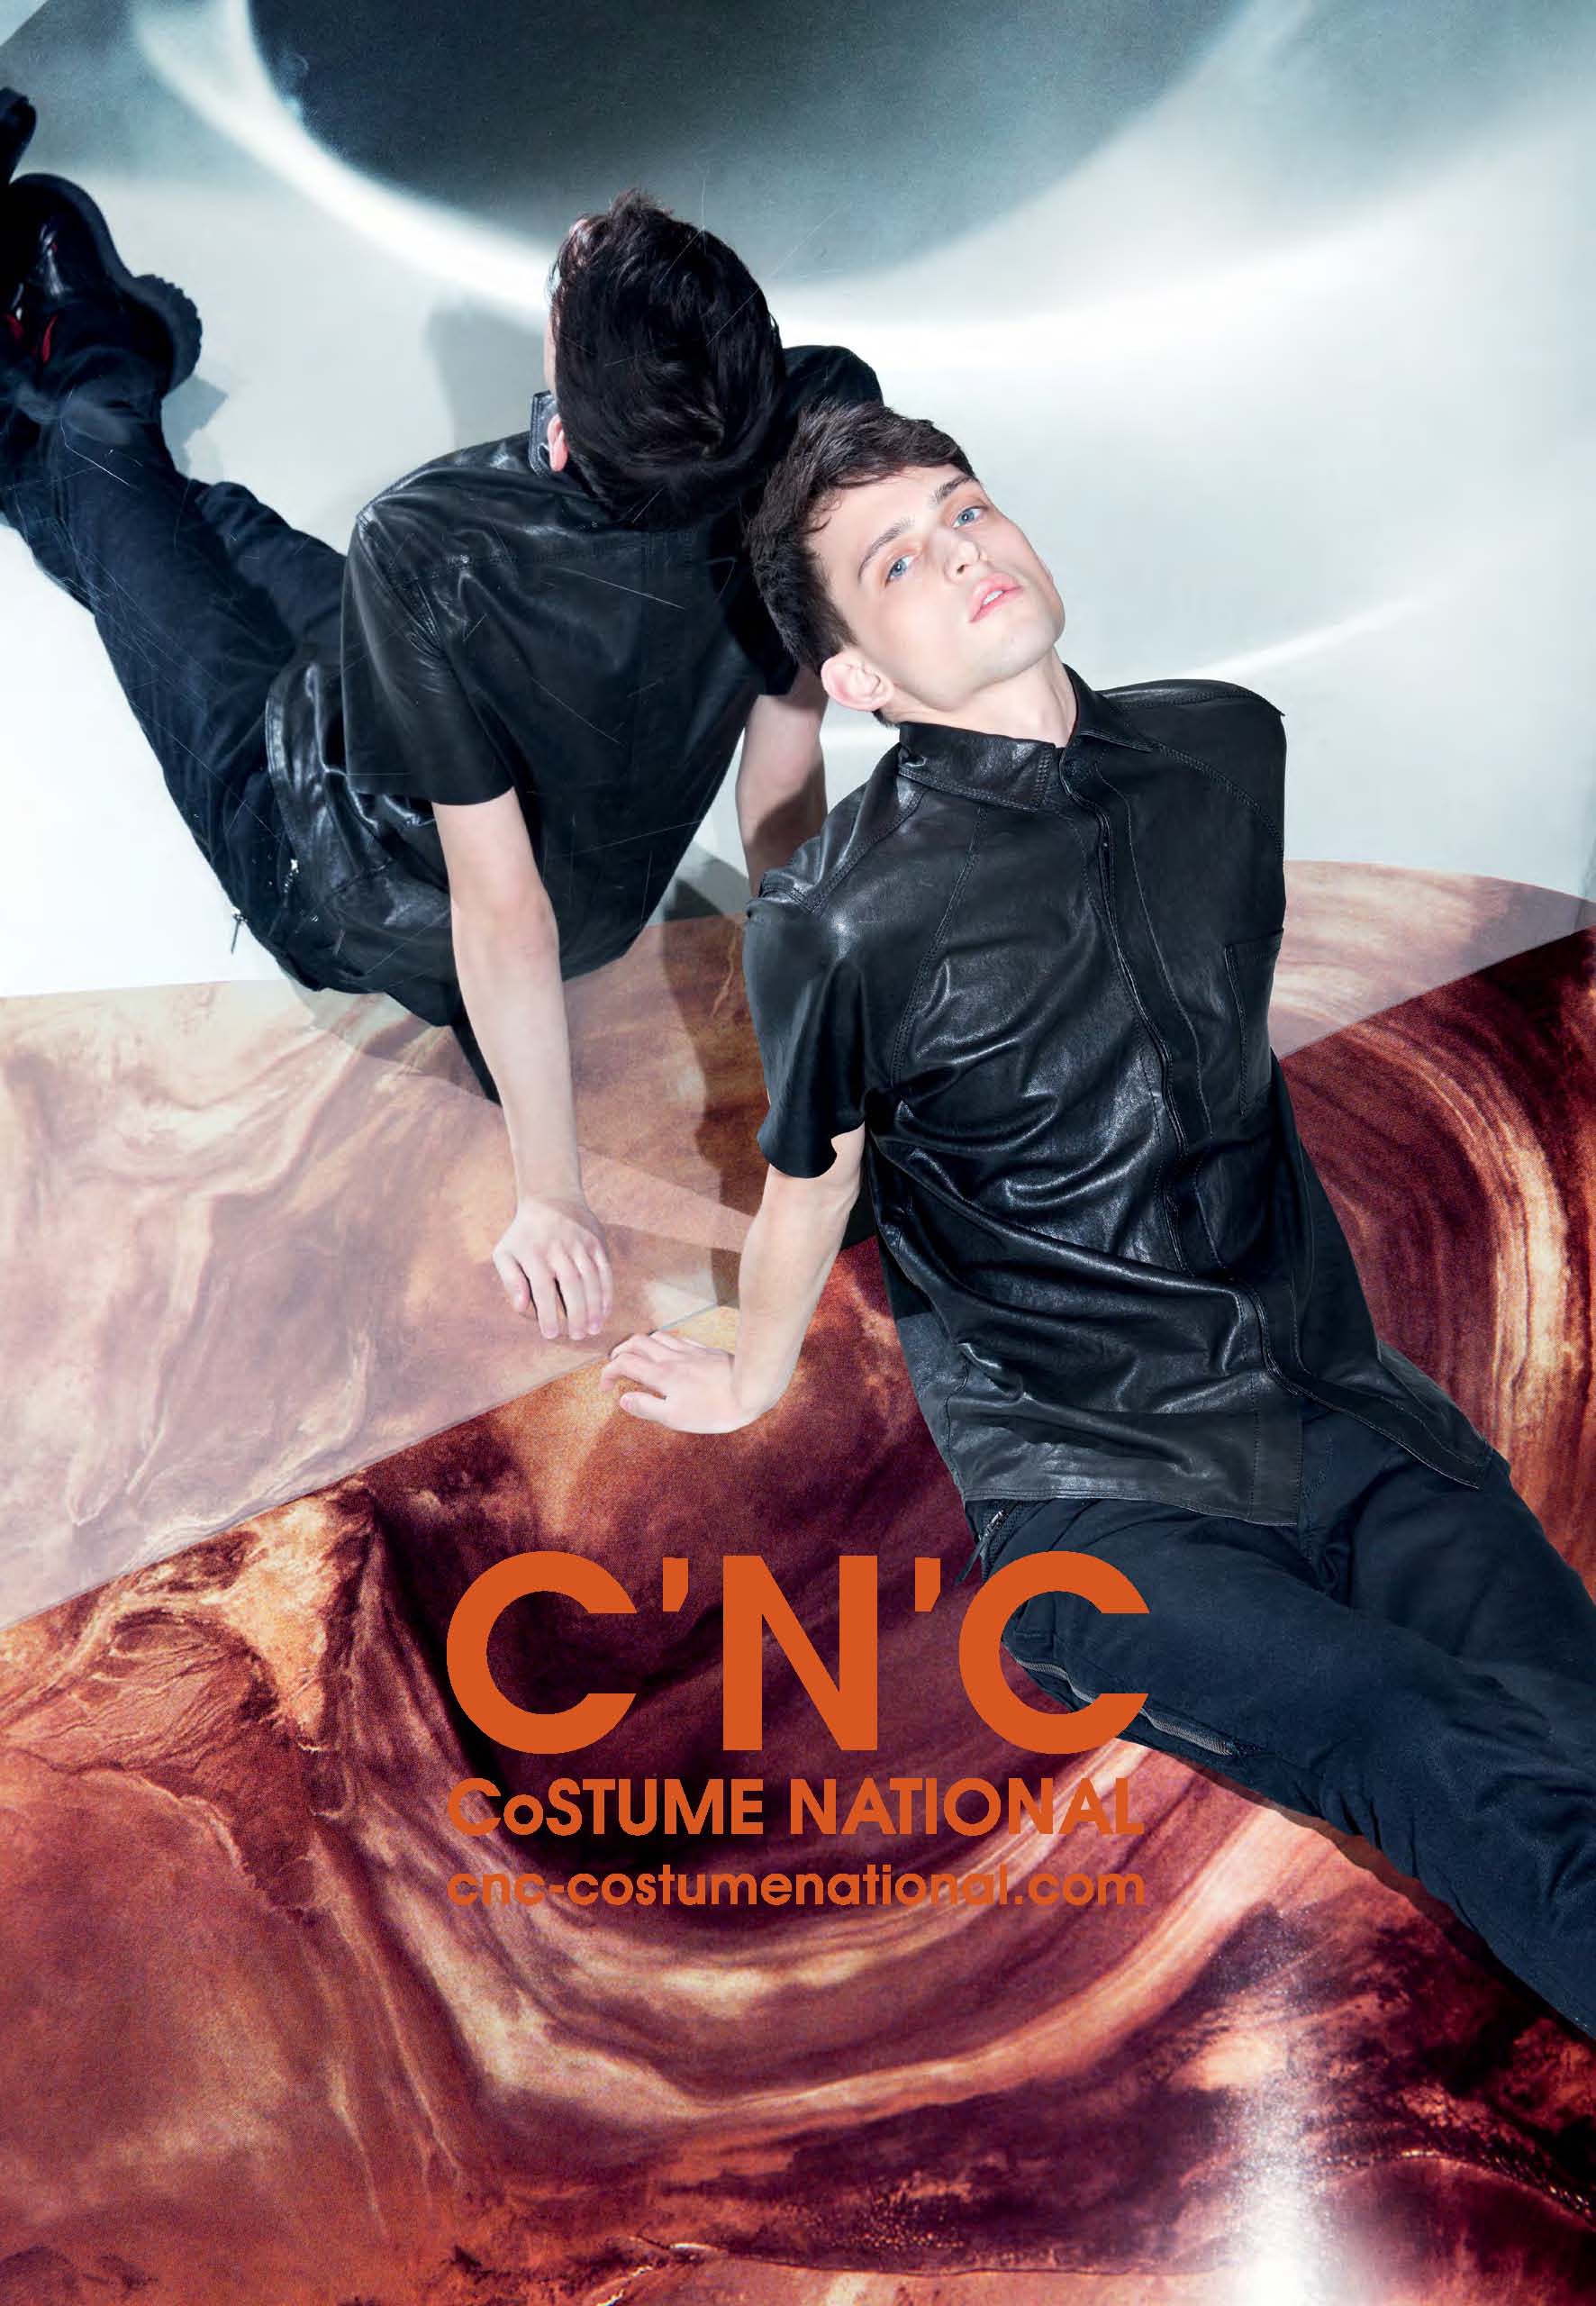 Brayden Pritchard Poses for C'N'C' Costume National's Spring/Summer 2013 Campaign